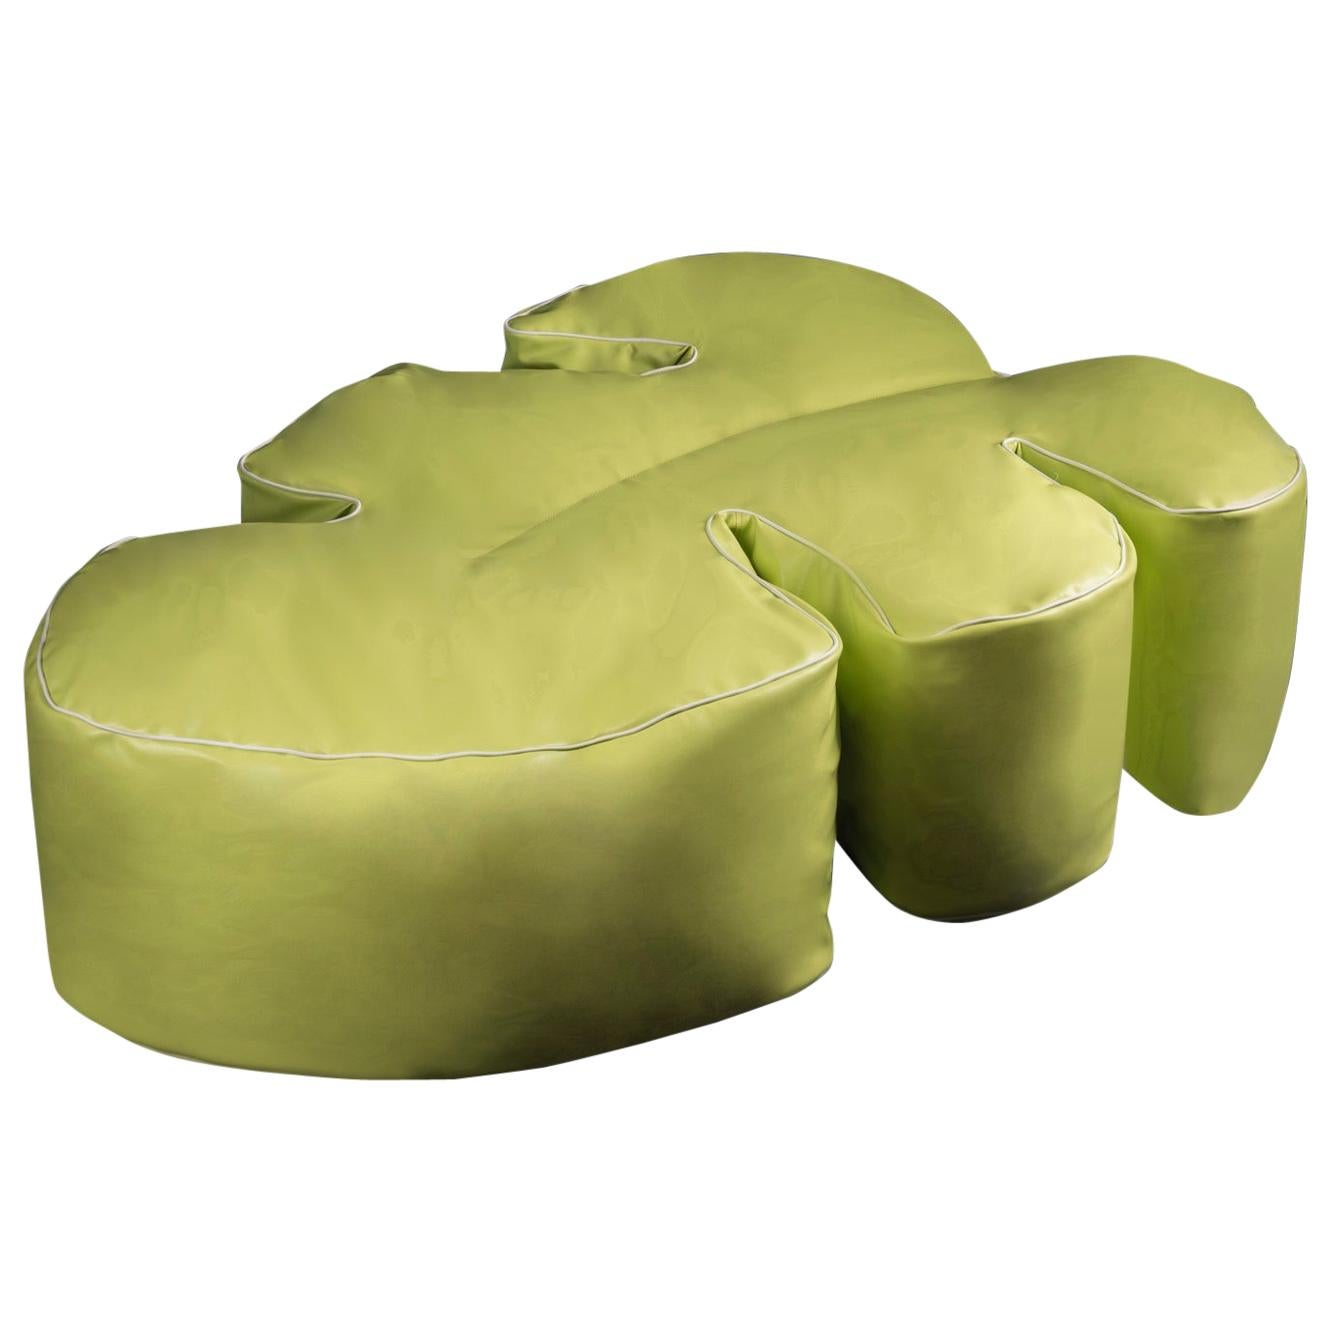 Pouf Philo Soft, for Outdoor, Waterproof Eco-Leather, Italy